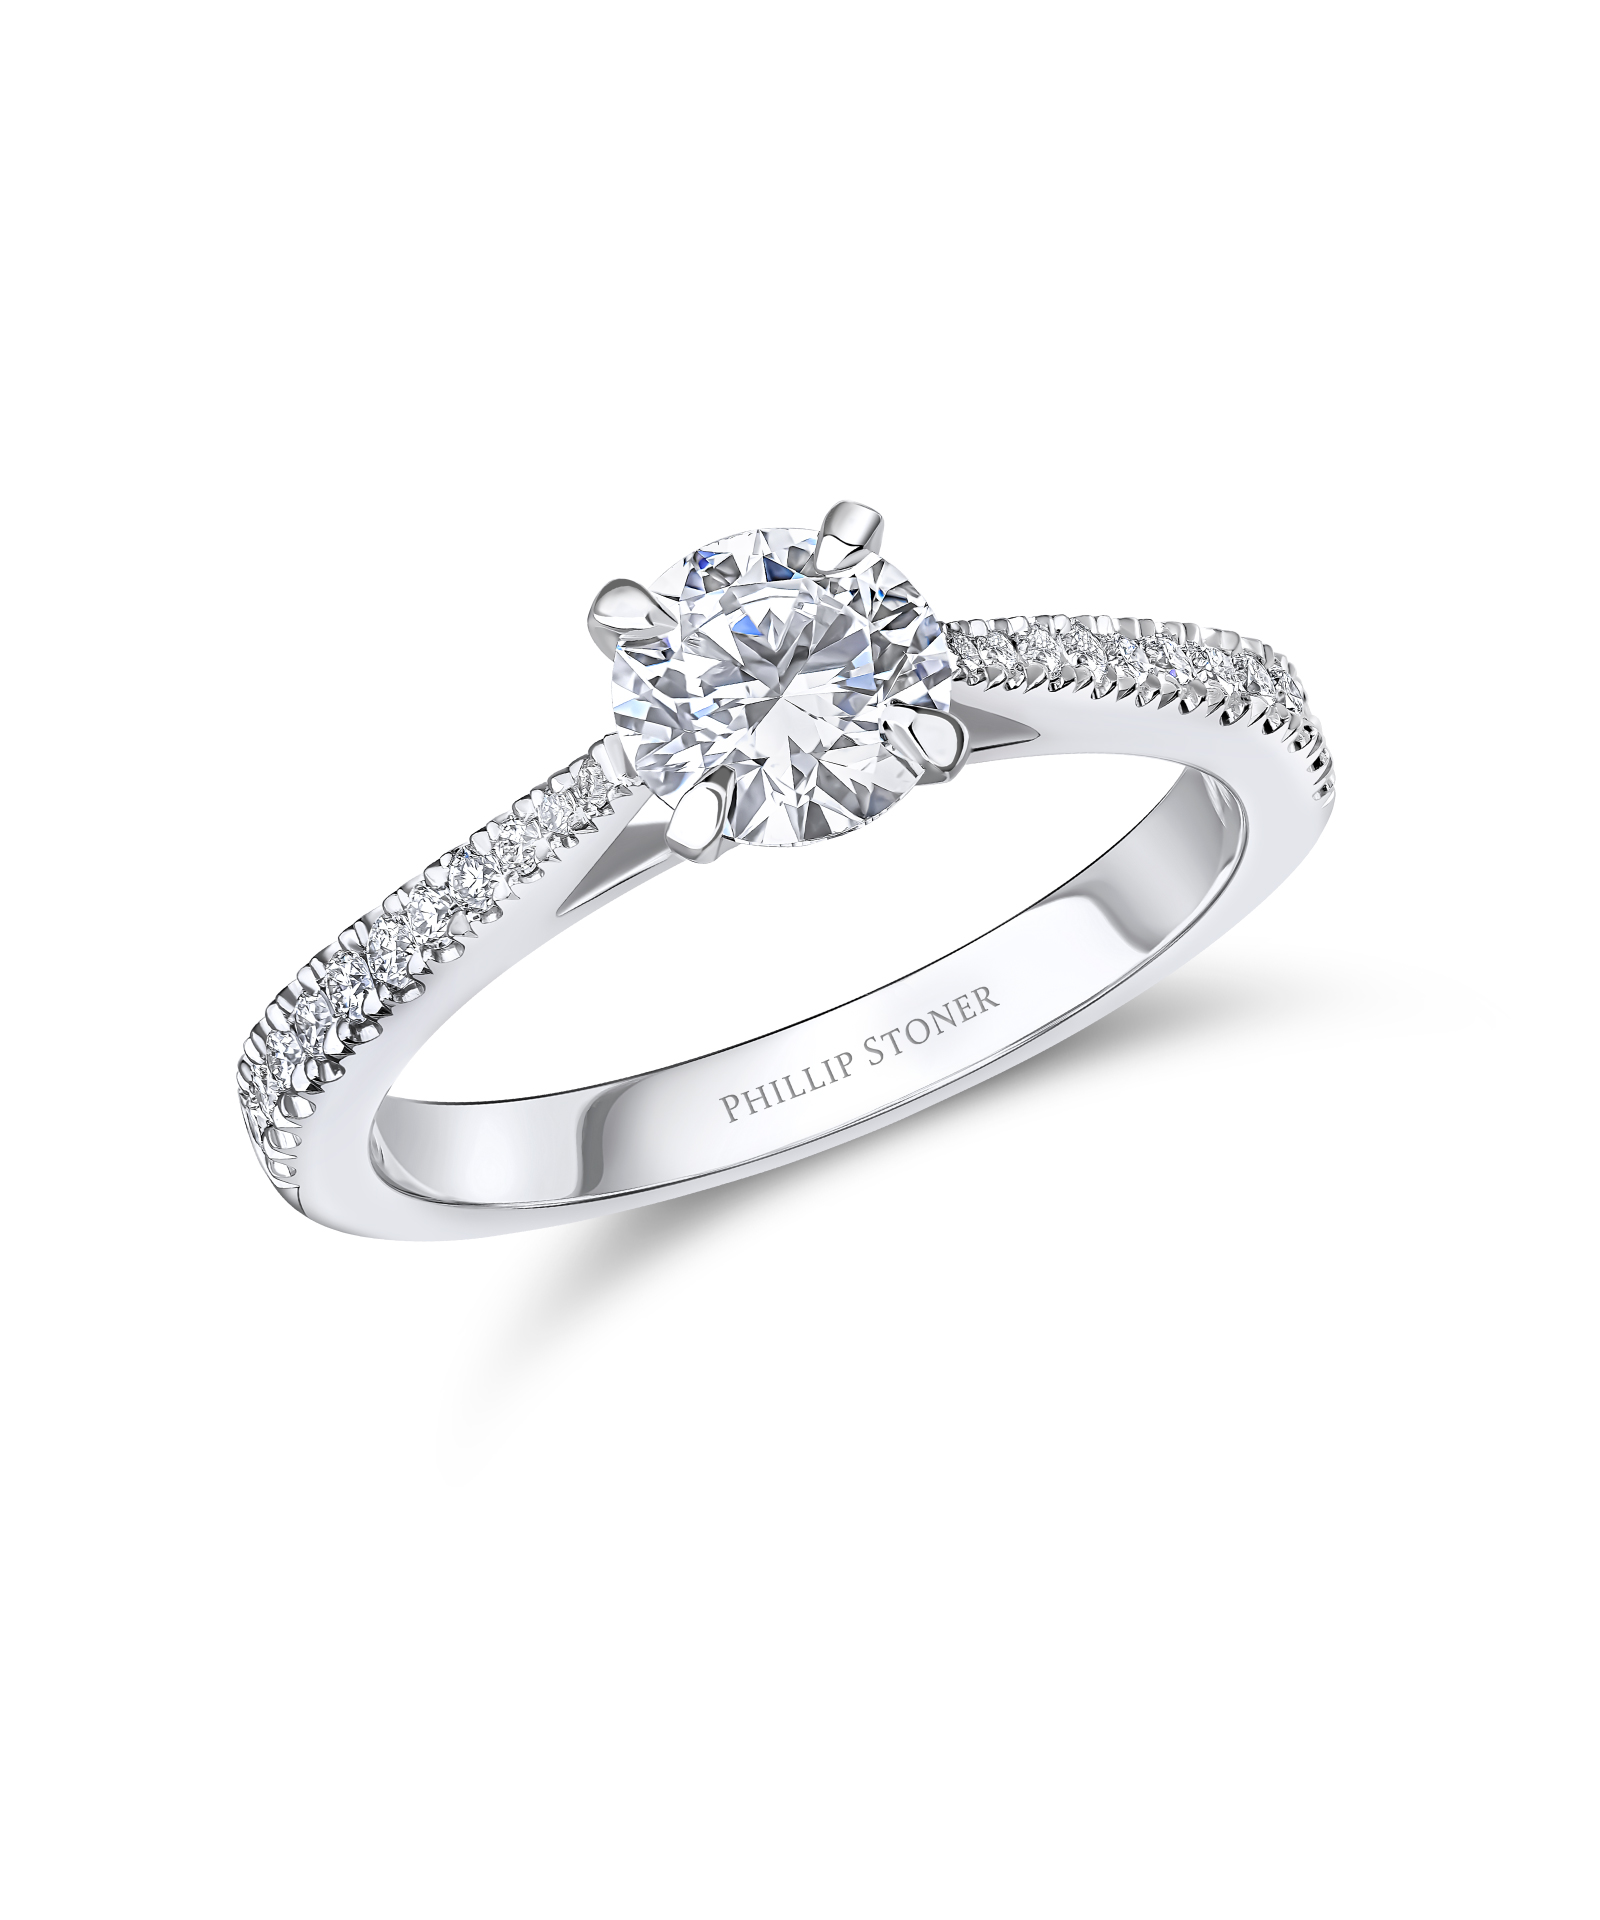 0.70ct Round Brilliant Cut Diamond Engagement Ring with Claw Set Shoulders - Phillip Stoner The Jeweller